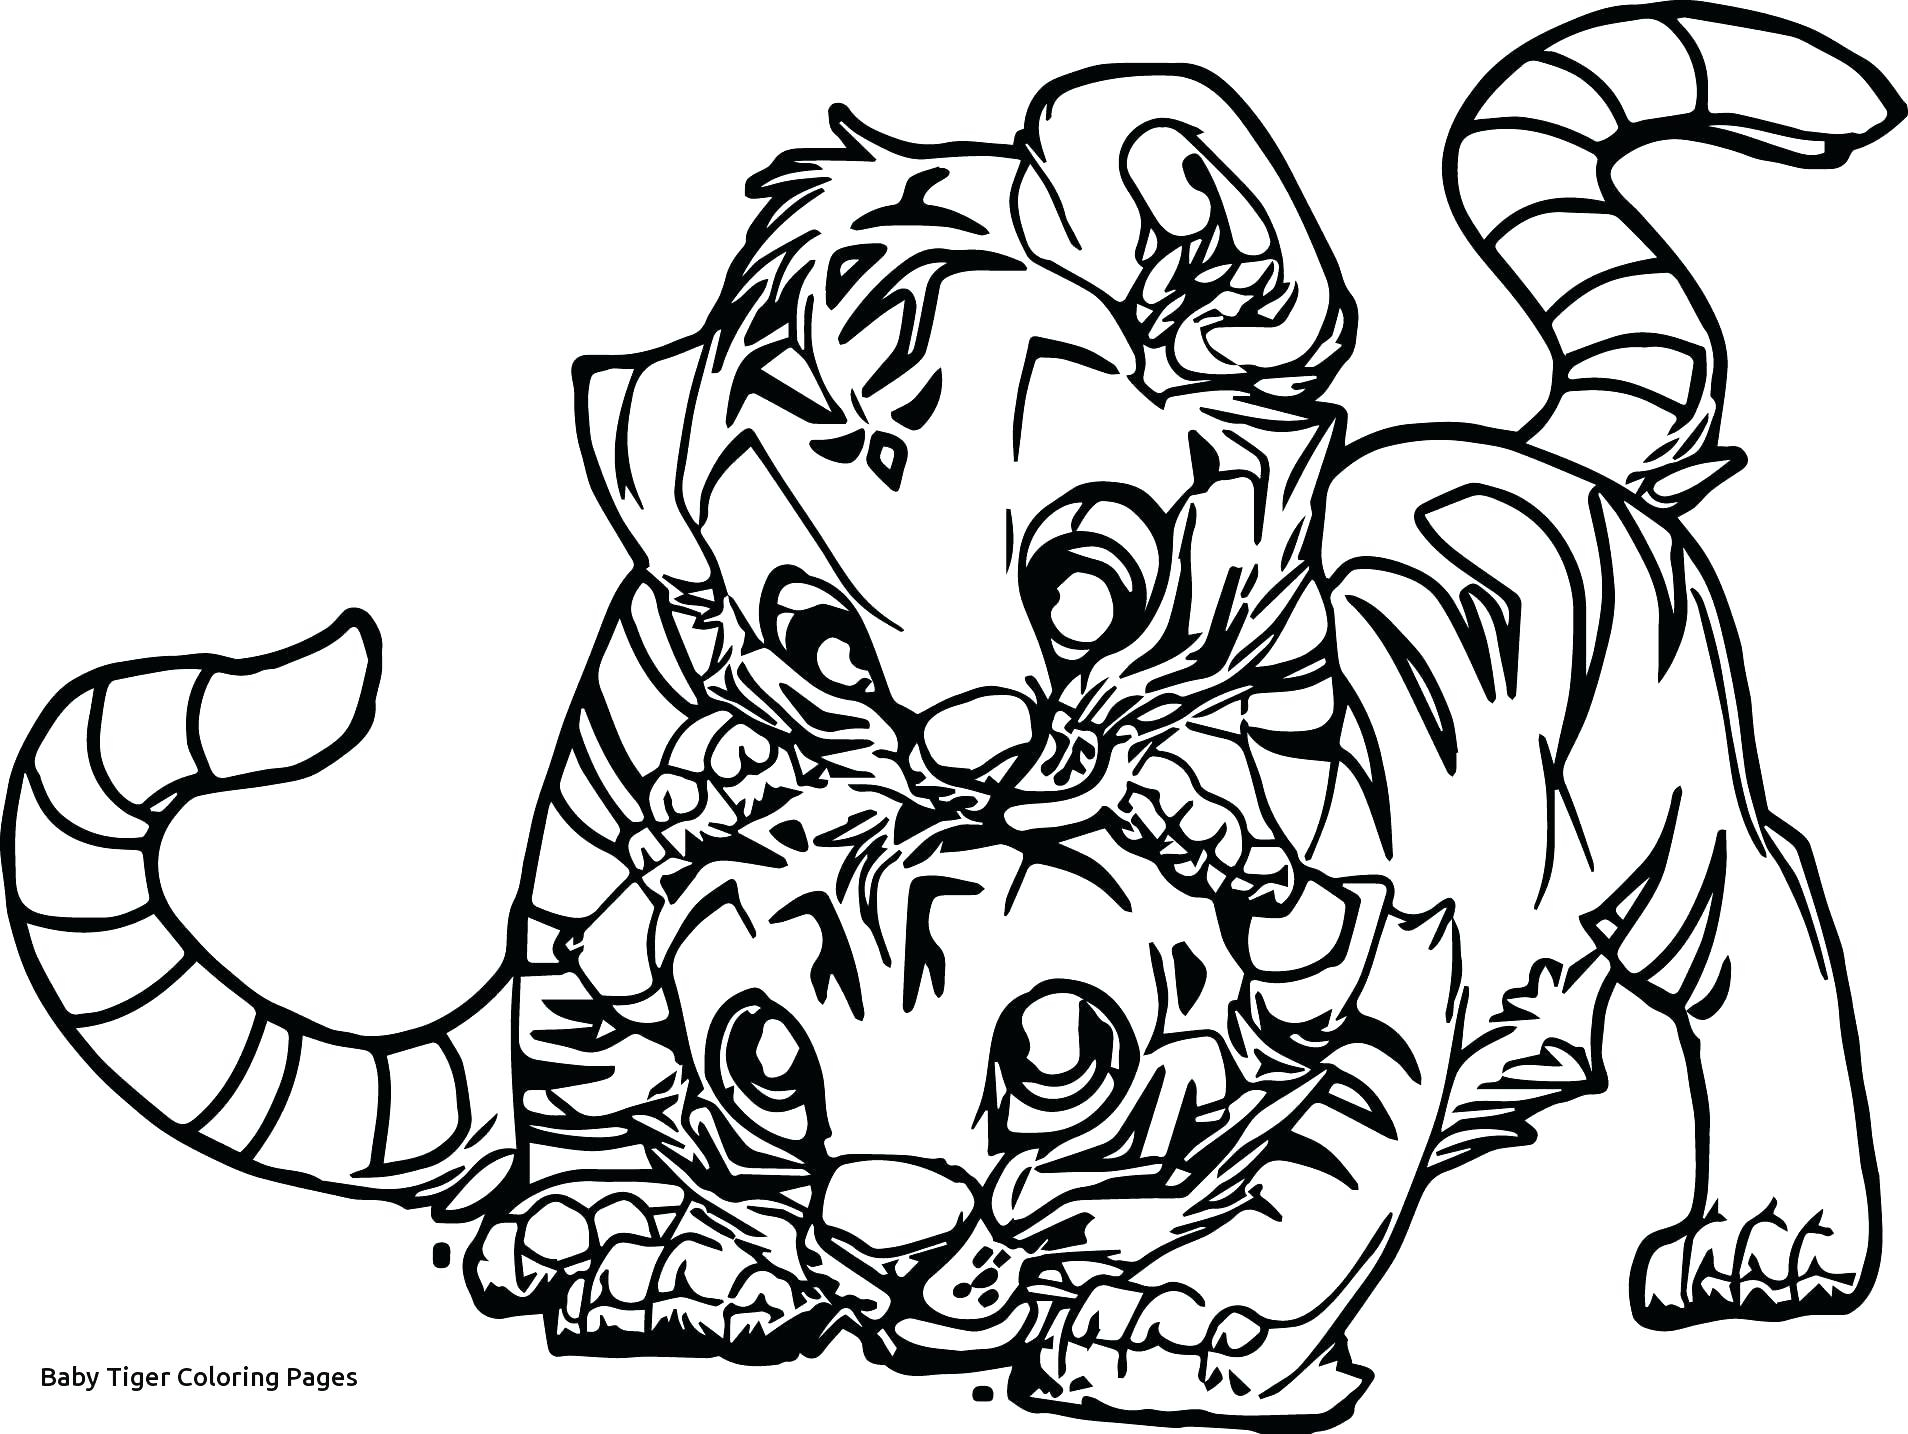 Coloring Pages Of Cute Tigers 10 Awesome Coloring Pages Of Cute Ba Tigers Compare 2 Save